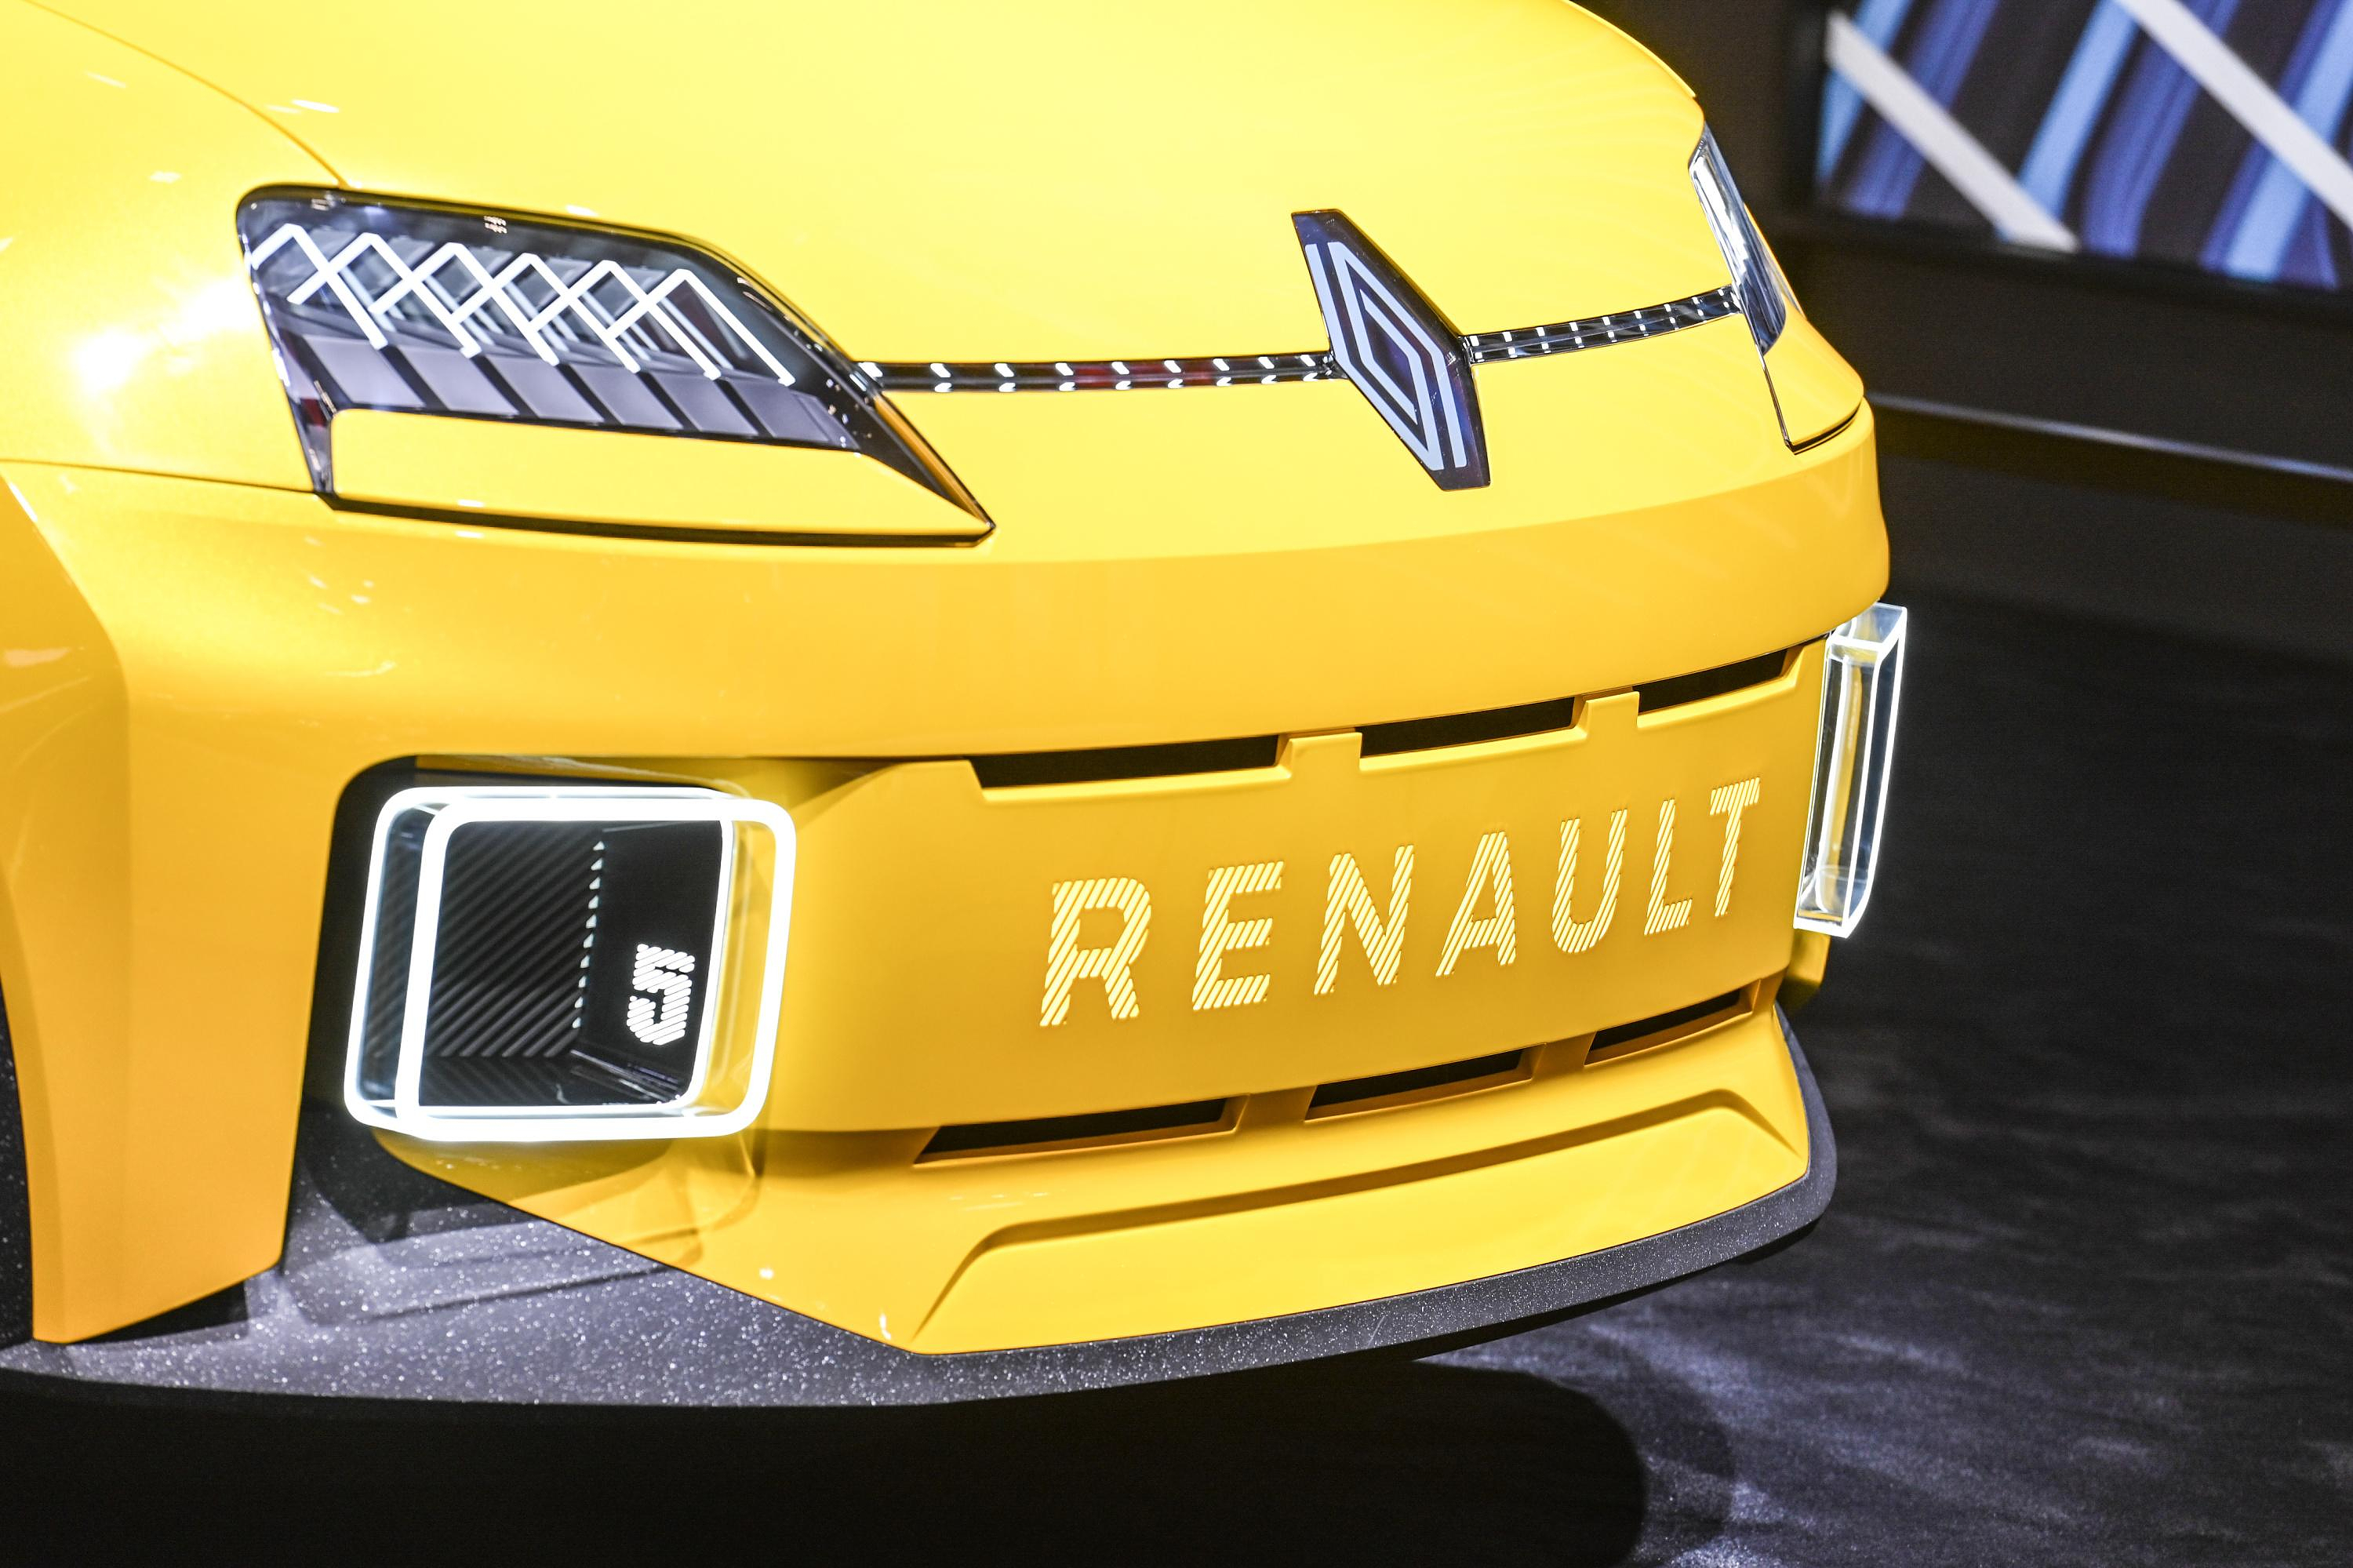 Renault cancels the IPO of its electric subsidiary Ampere